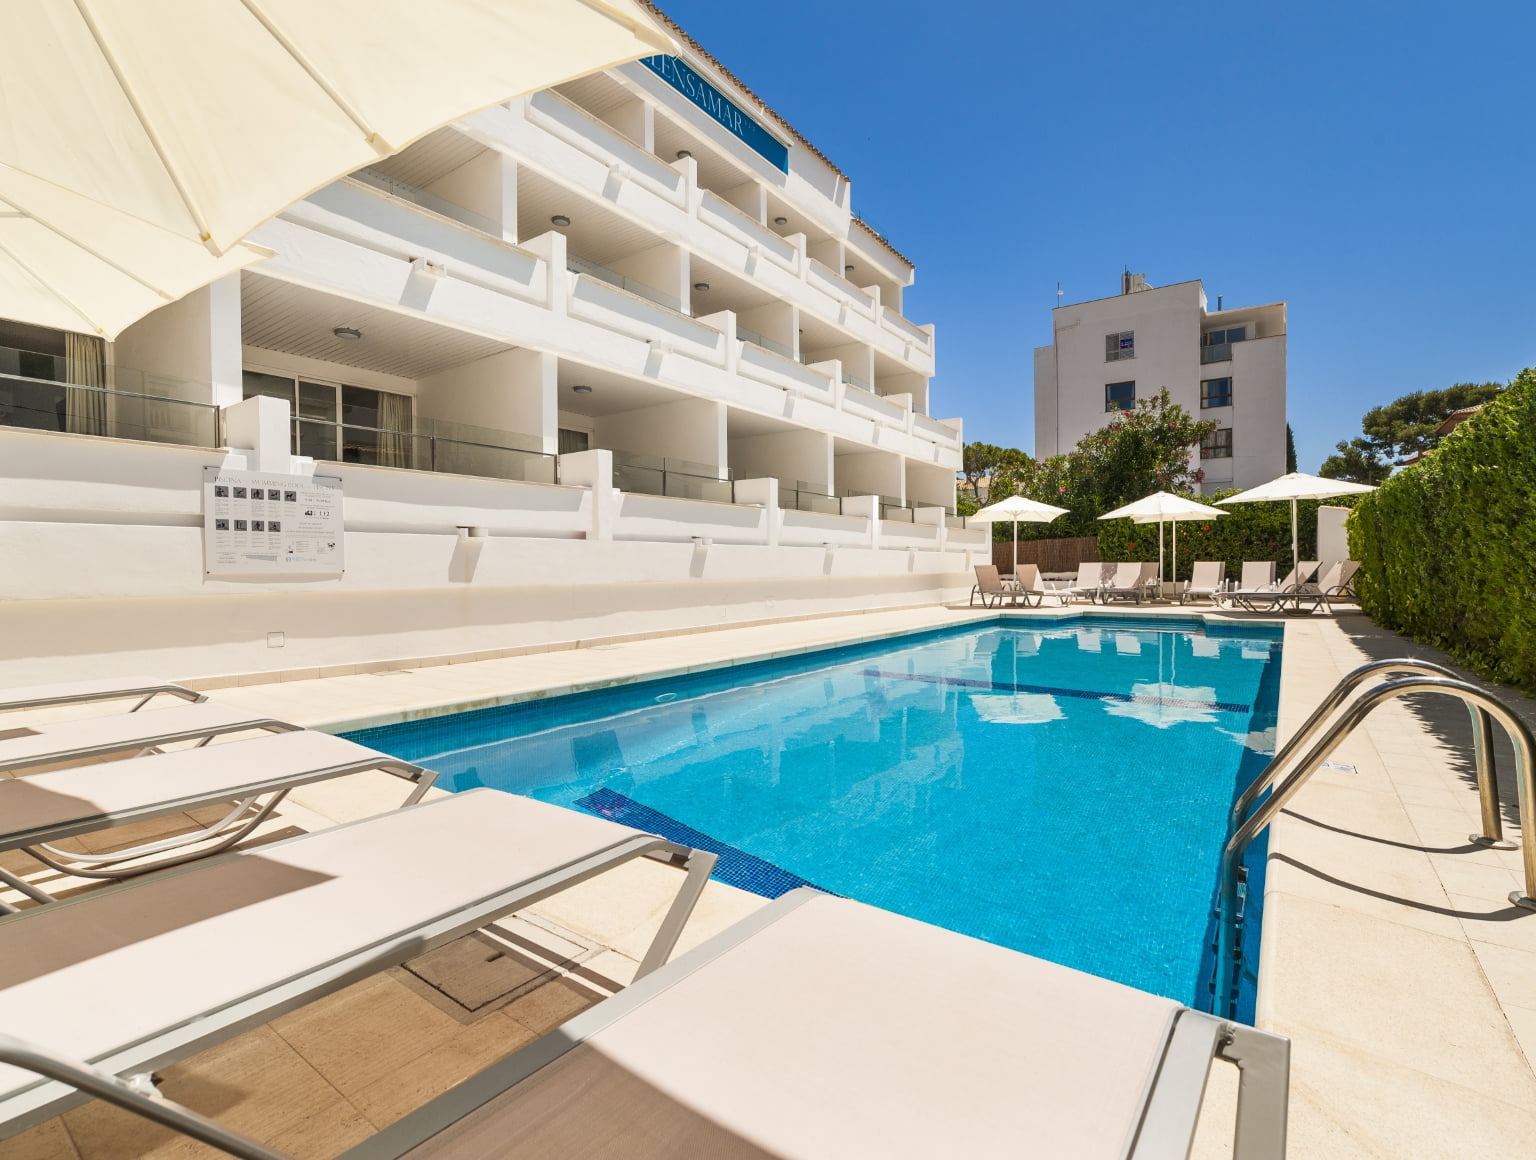 Photo of the pool with sun loungers at the Hoposa Pollensamar Apartments